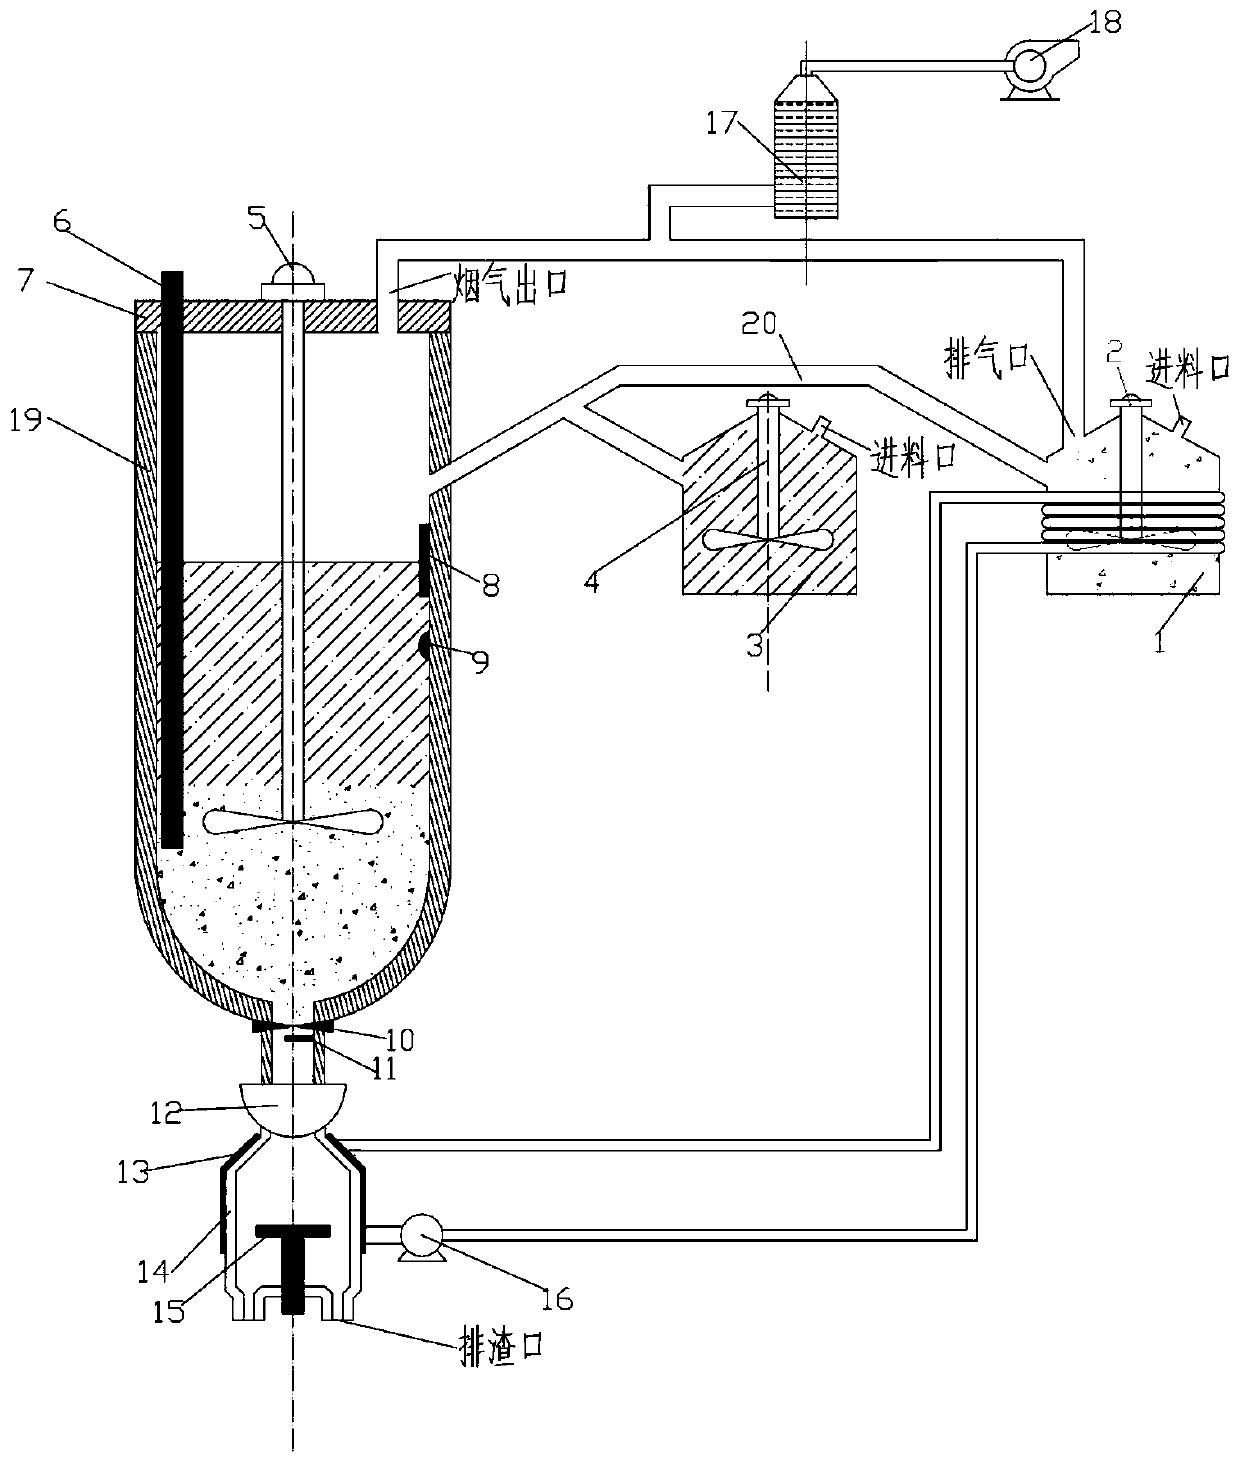 A molten salt heat treatment system for waste incineration fly ash